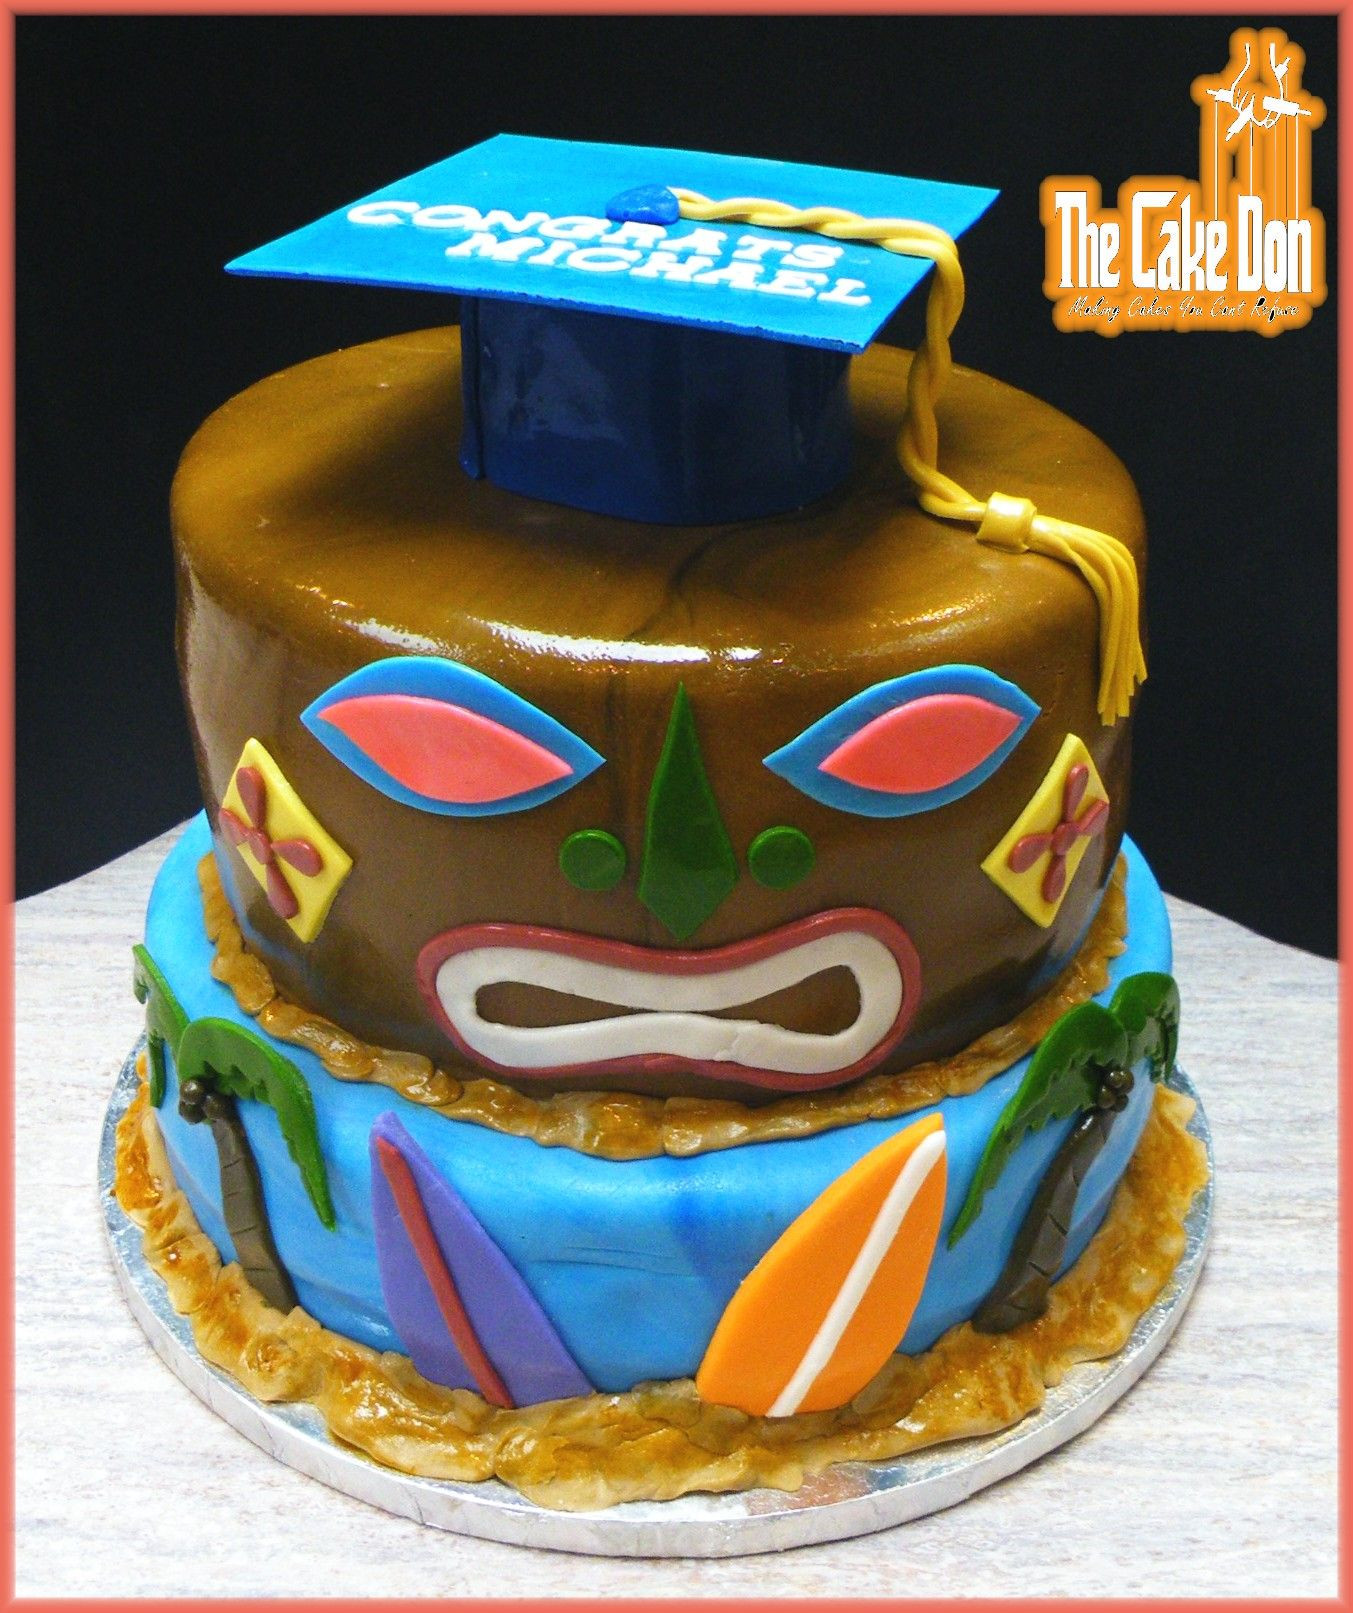 Luau Graduation Party Ideas
 The LUAU GRADUATION PARTY Cake by THE CAKE DON in 2019